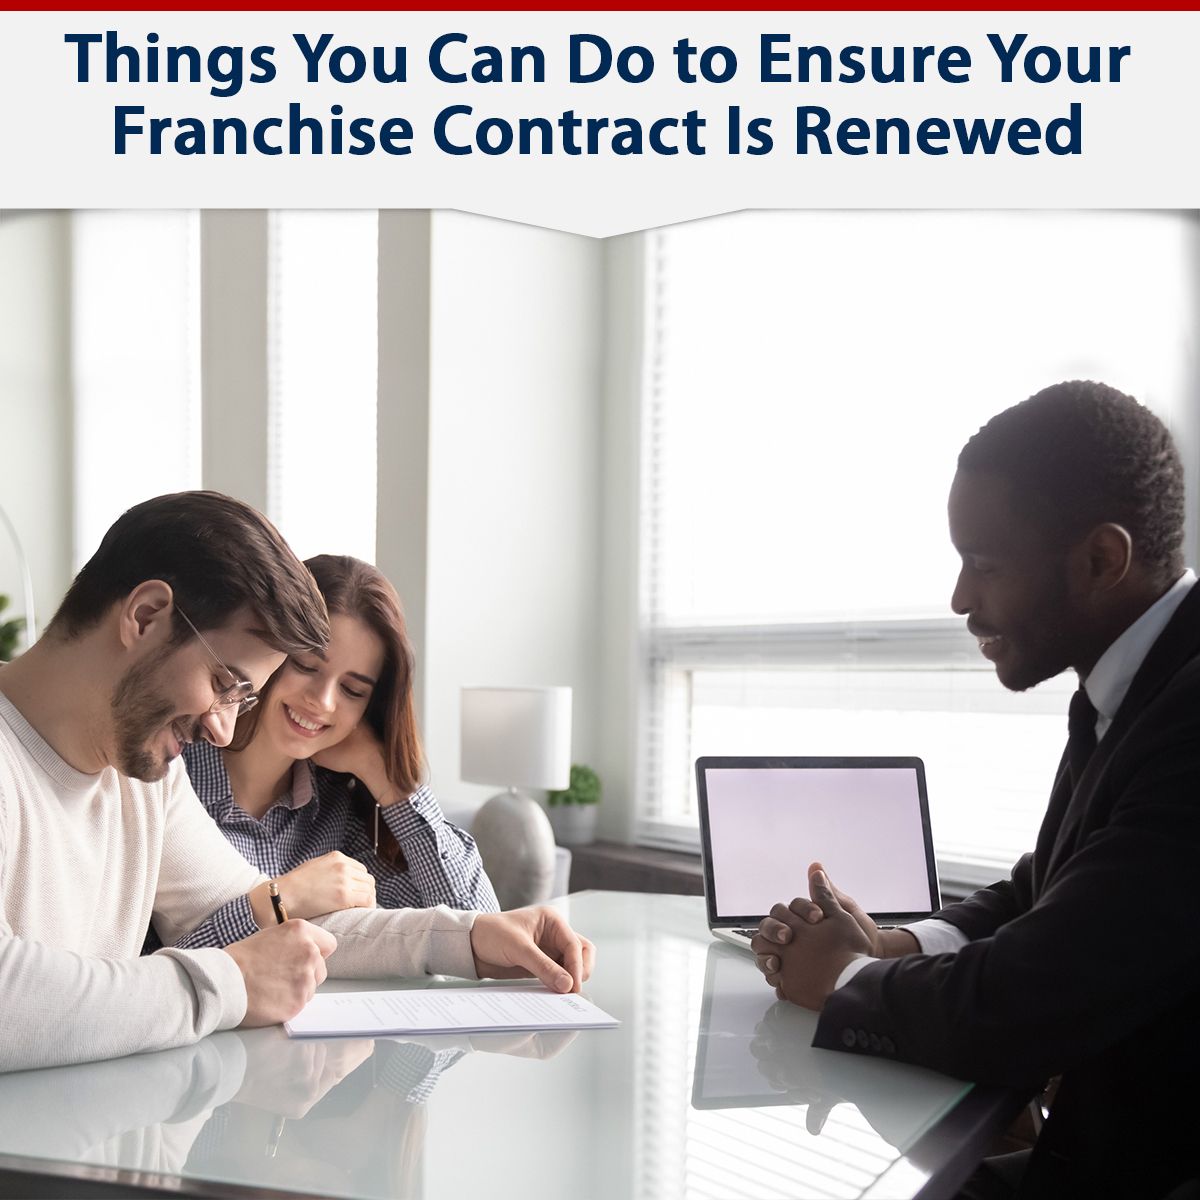 Things You Can Do to Ensure Your Franchise Contract Is Renewed